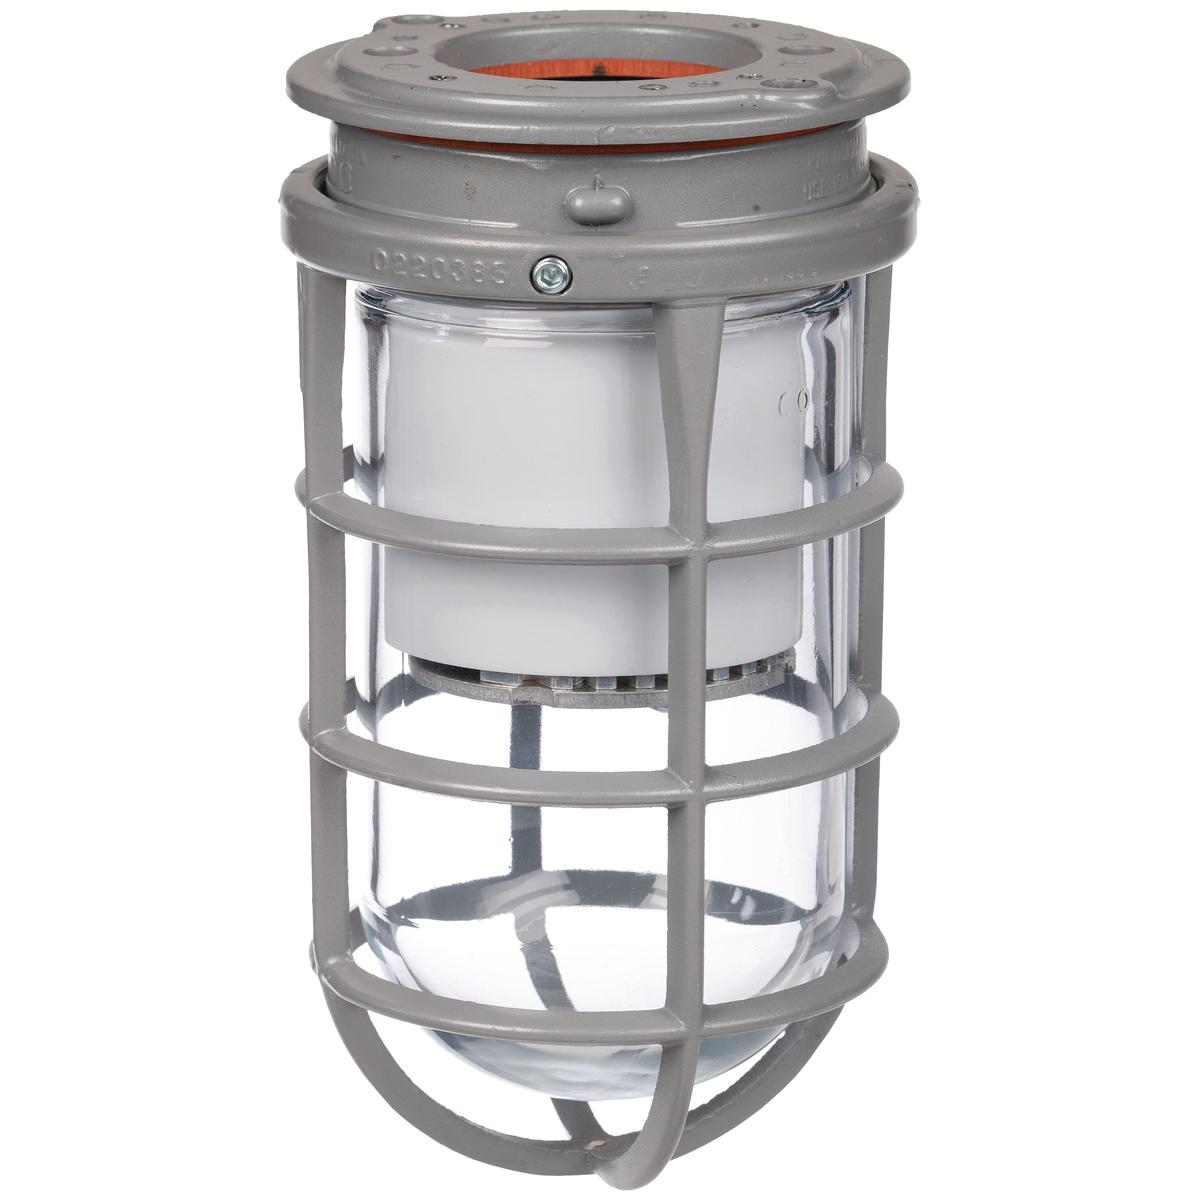 Hubbell VSL1330RAHG The VSL Series is a Vapor Tight/ Utility fixture using energy efficient LED's. This fixture is made with a cast copper-free aluminum housing and mount that is  suitable for harsh and hazardous environments. With the design of this fixtures internal heat s